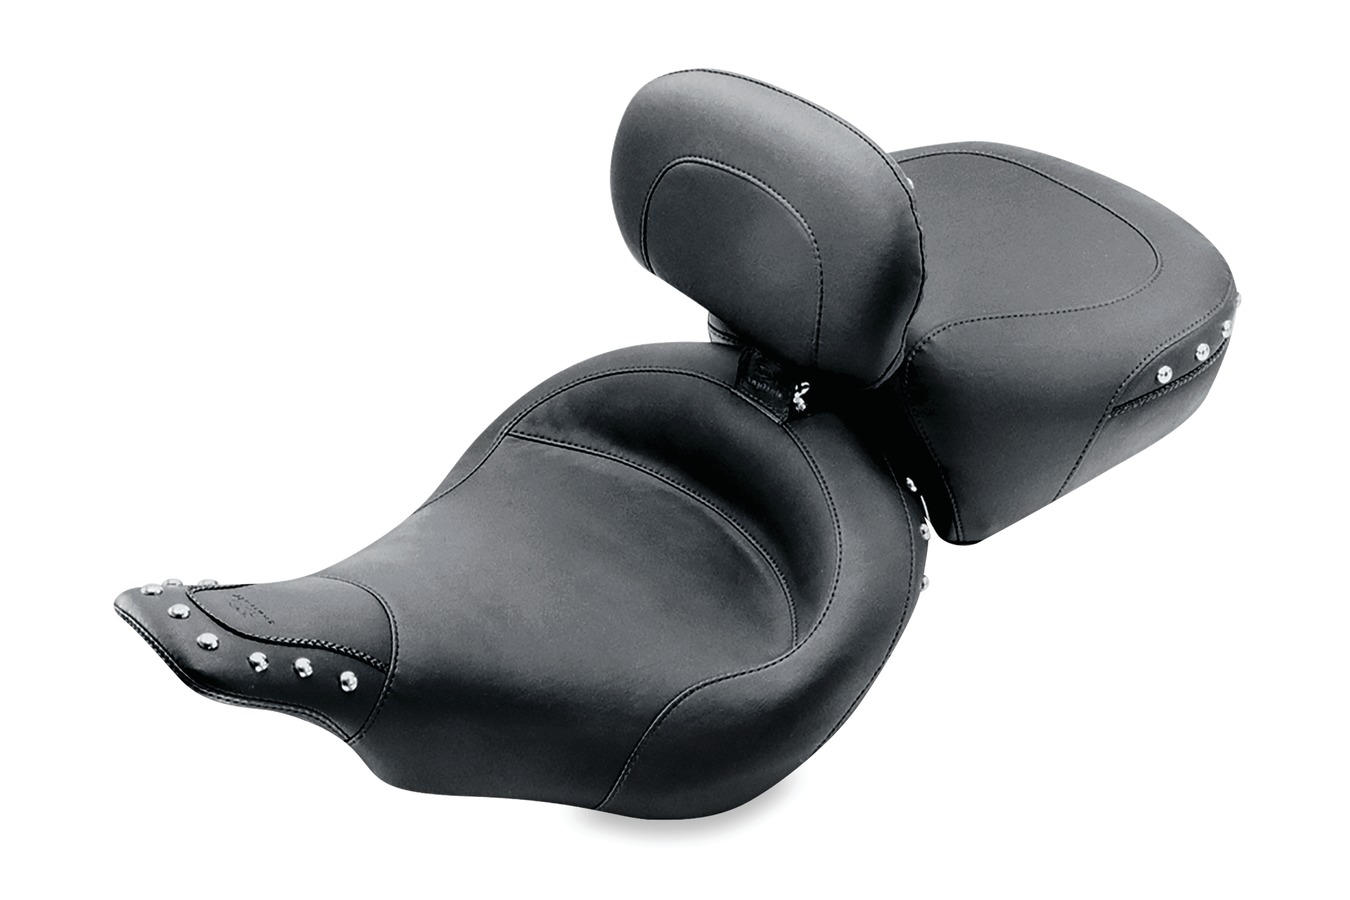 Standard Touring Solo Seat with Driver Backrest for Harley-Davidson Electra Glide & Road Glide 1997-